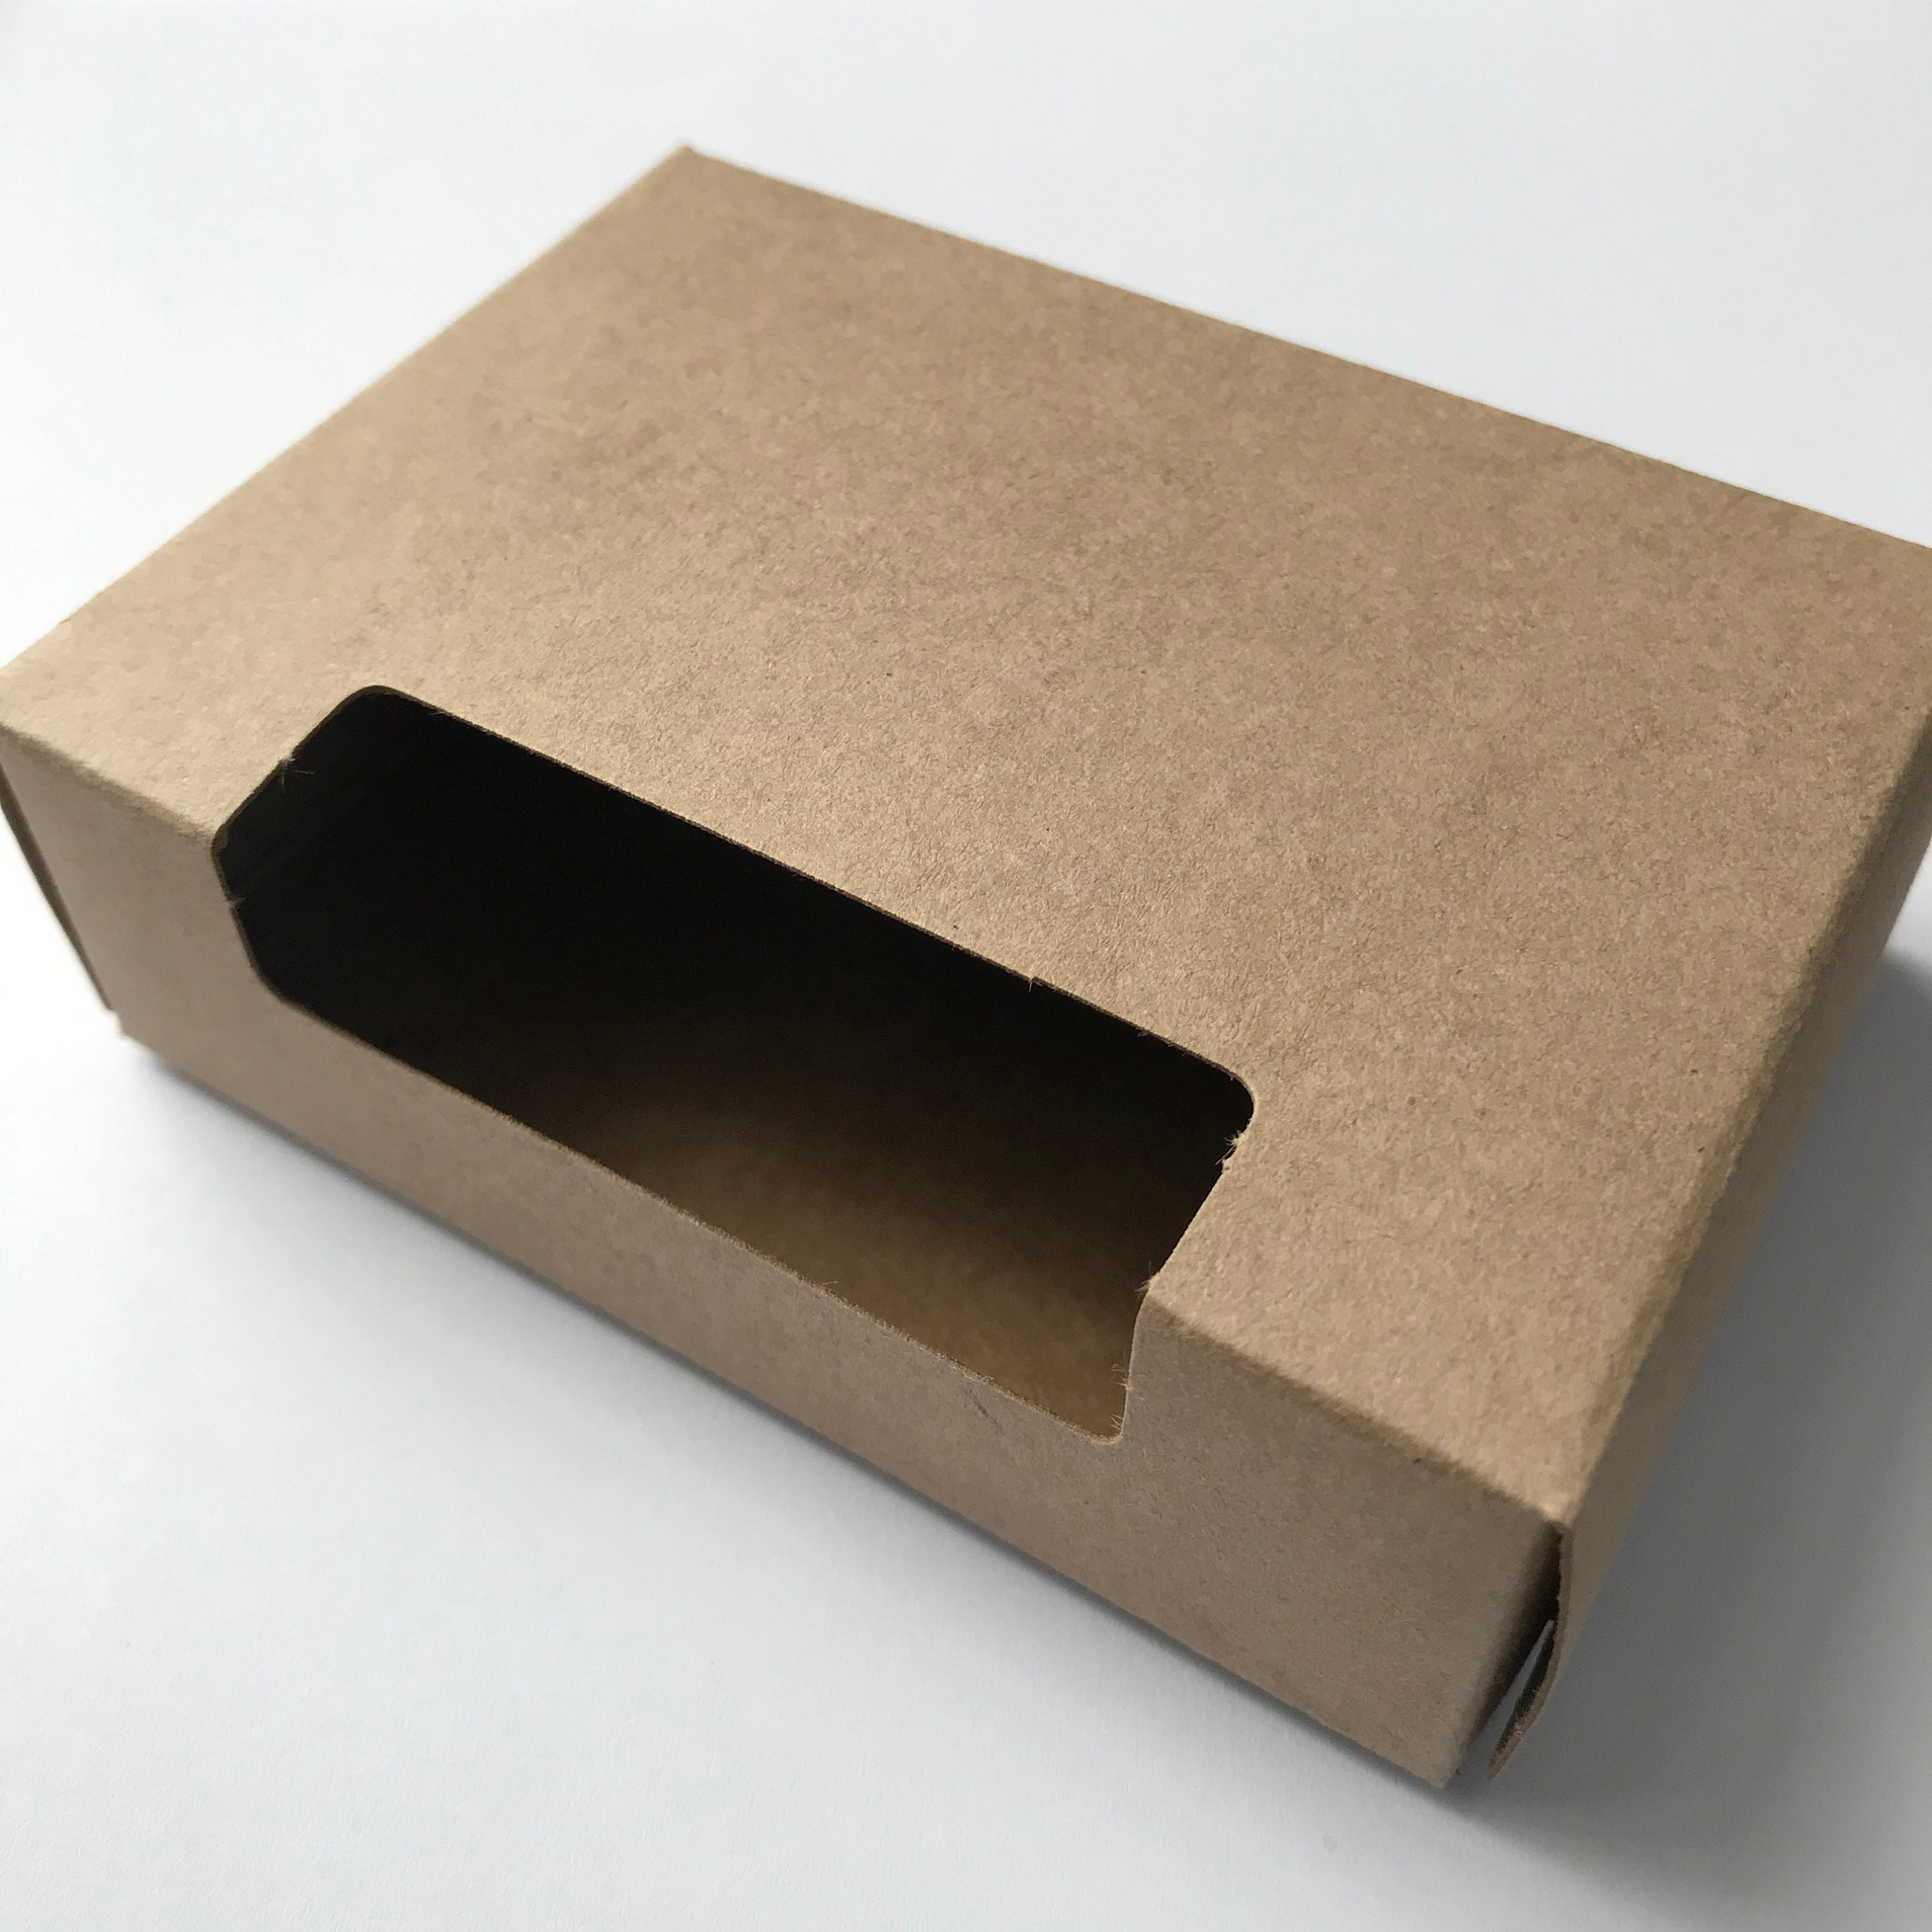 Why Do Kraft Soap Packaging Boxes Stand Out for Soap Products?